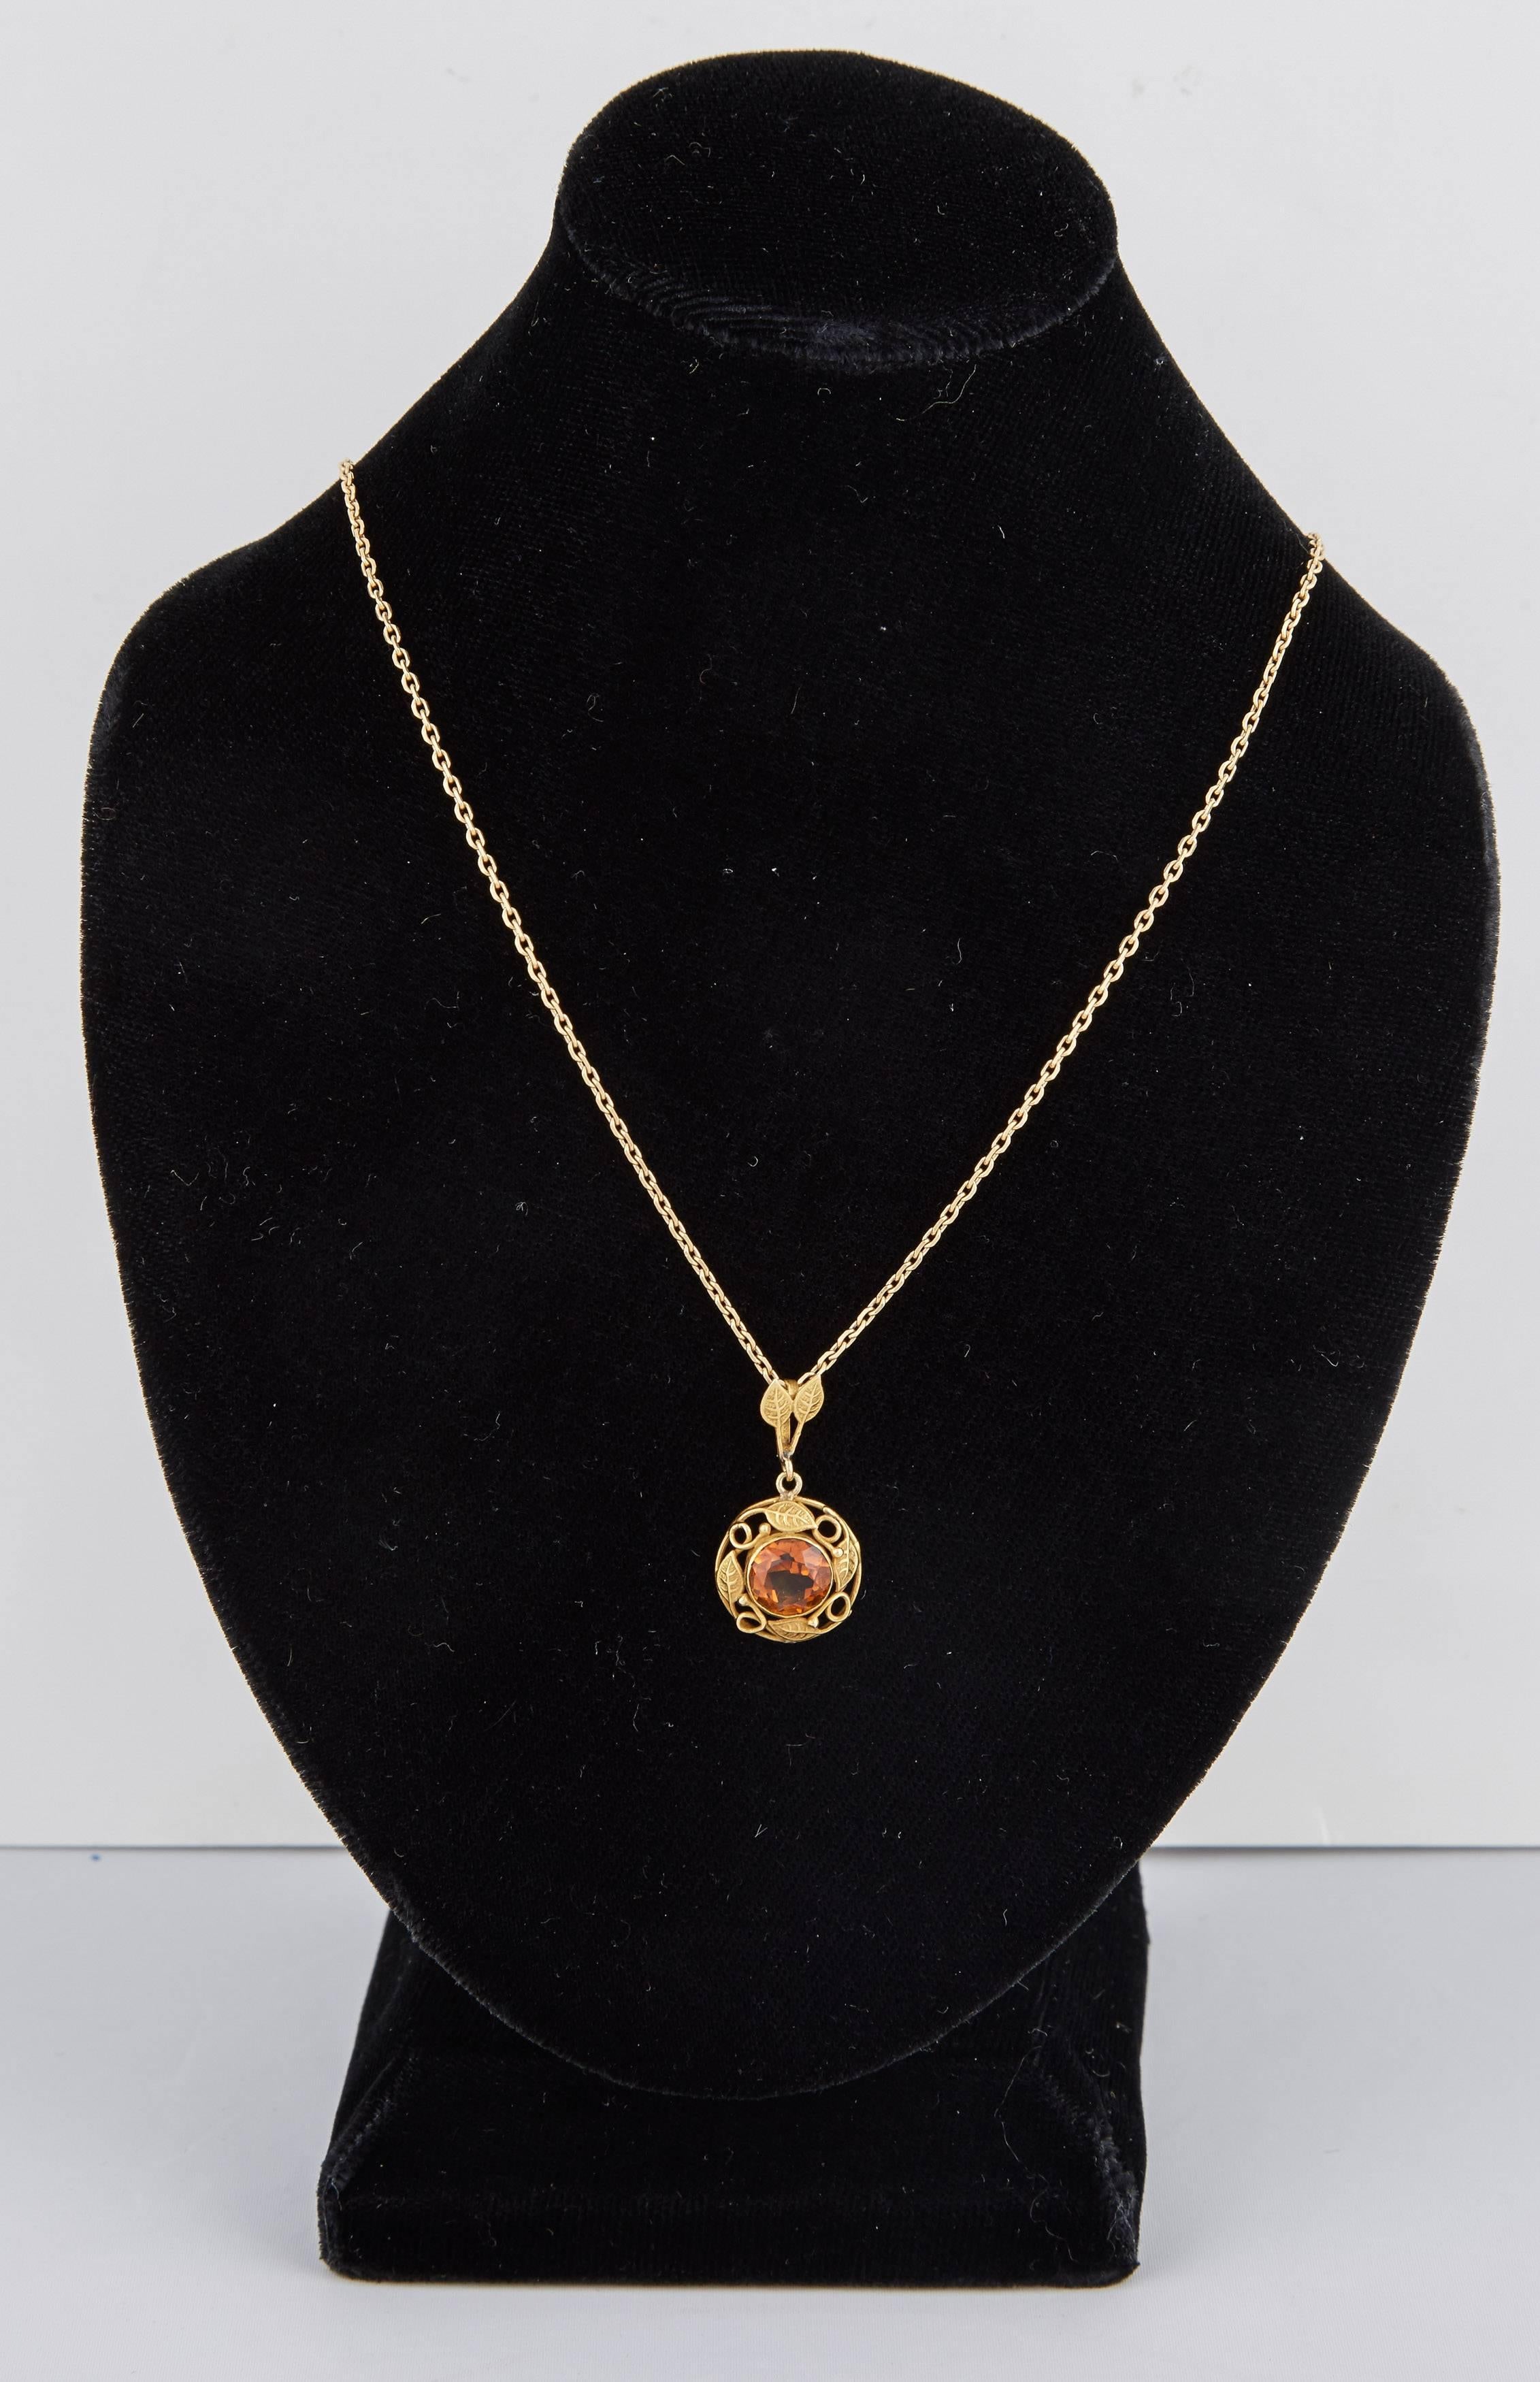 This beautiful American Arts & Crafts pendant dates from around 1910 and was made in Boston. The circular 14k gold pendant set with a faceted citrine, enhanced with gold openwork vines, the suspension ring of similar design. Chain not included.